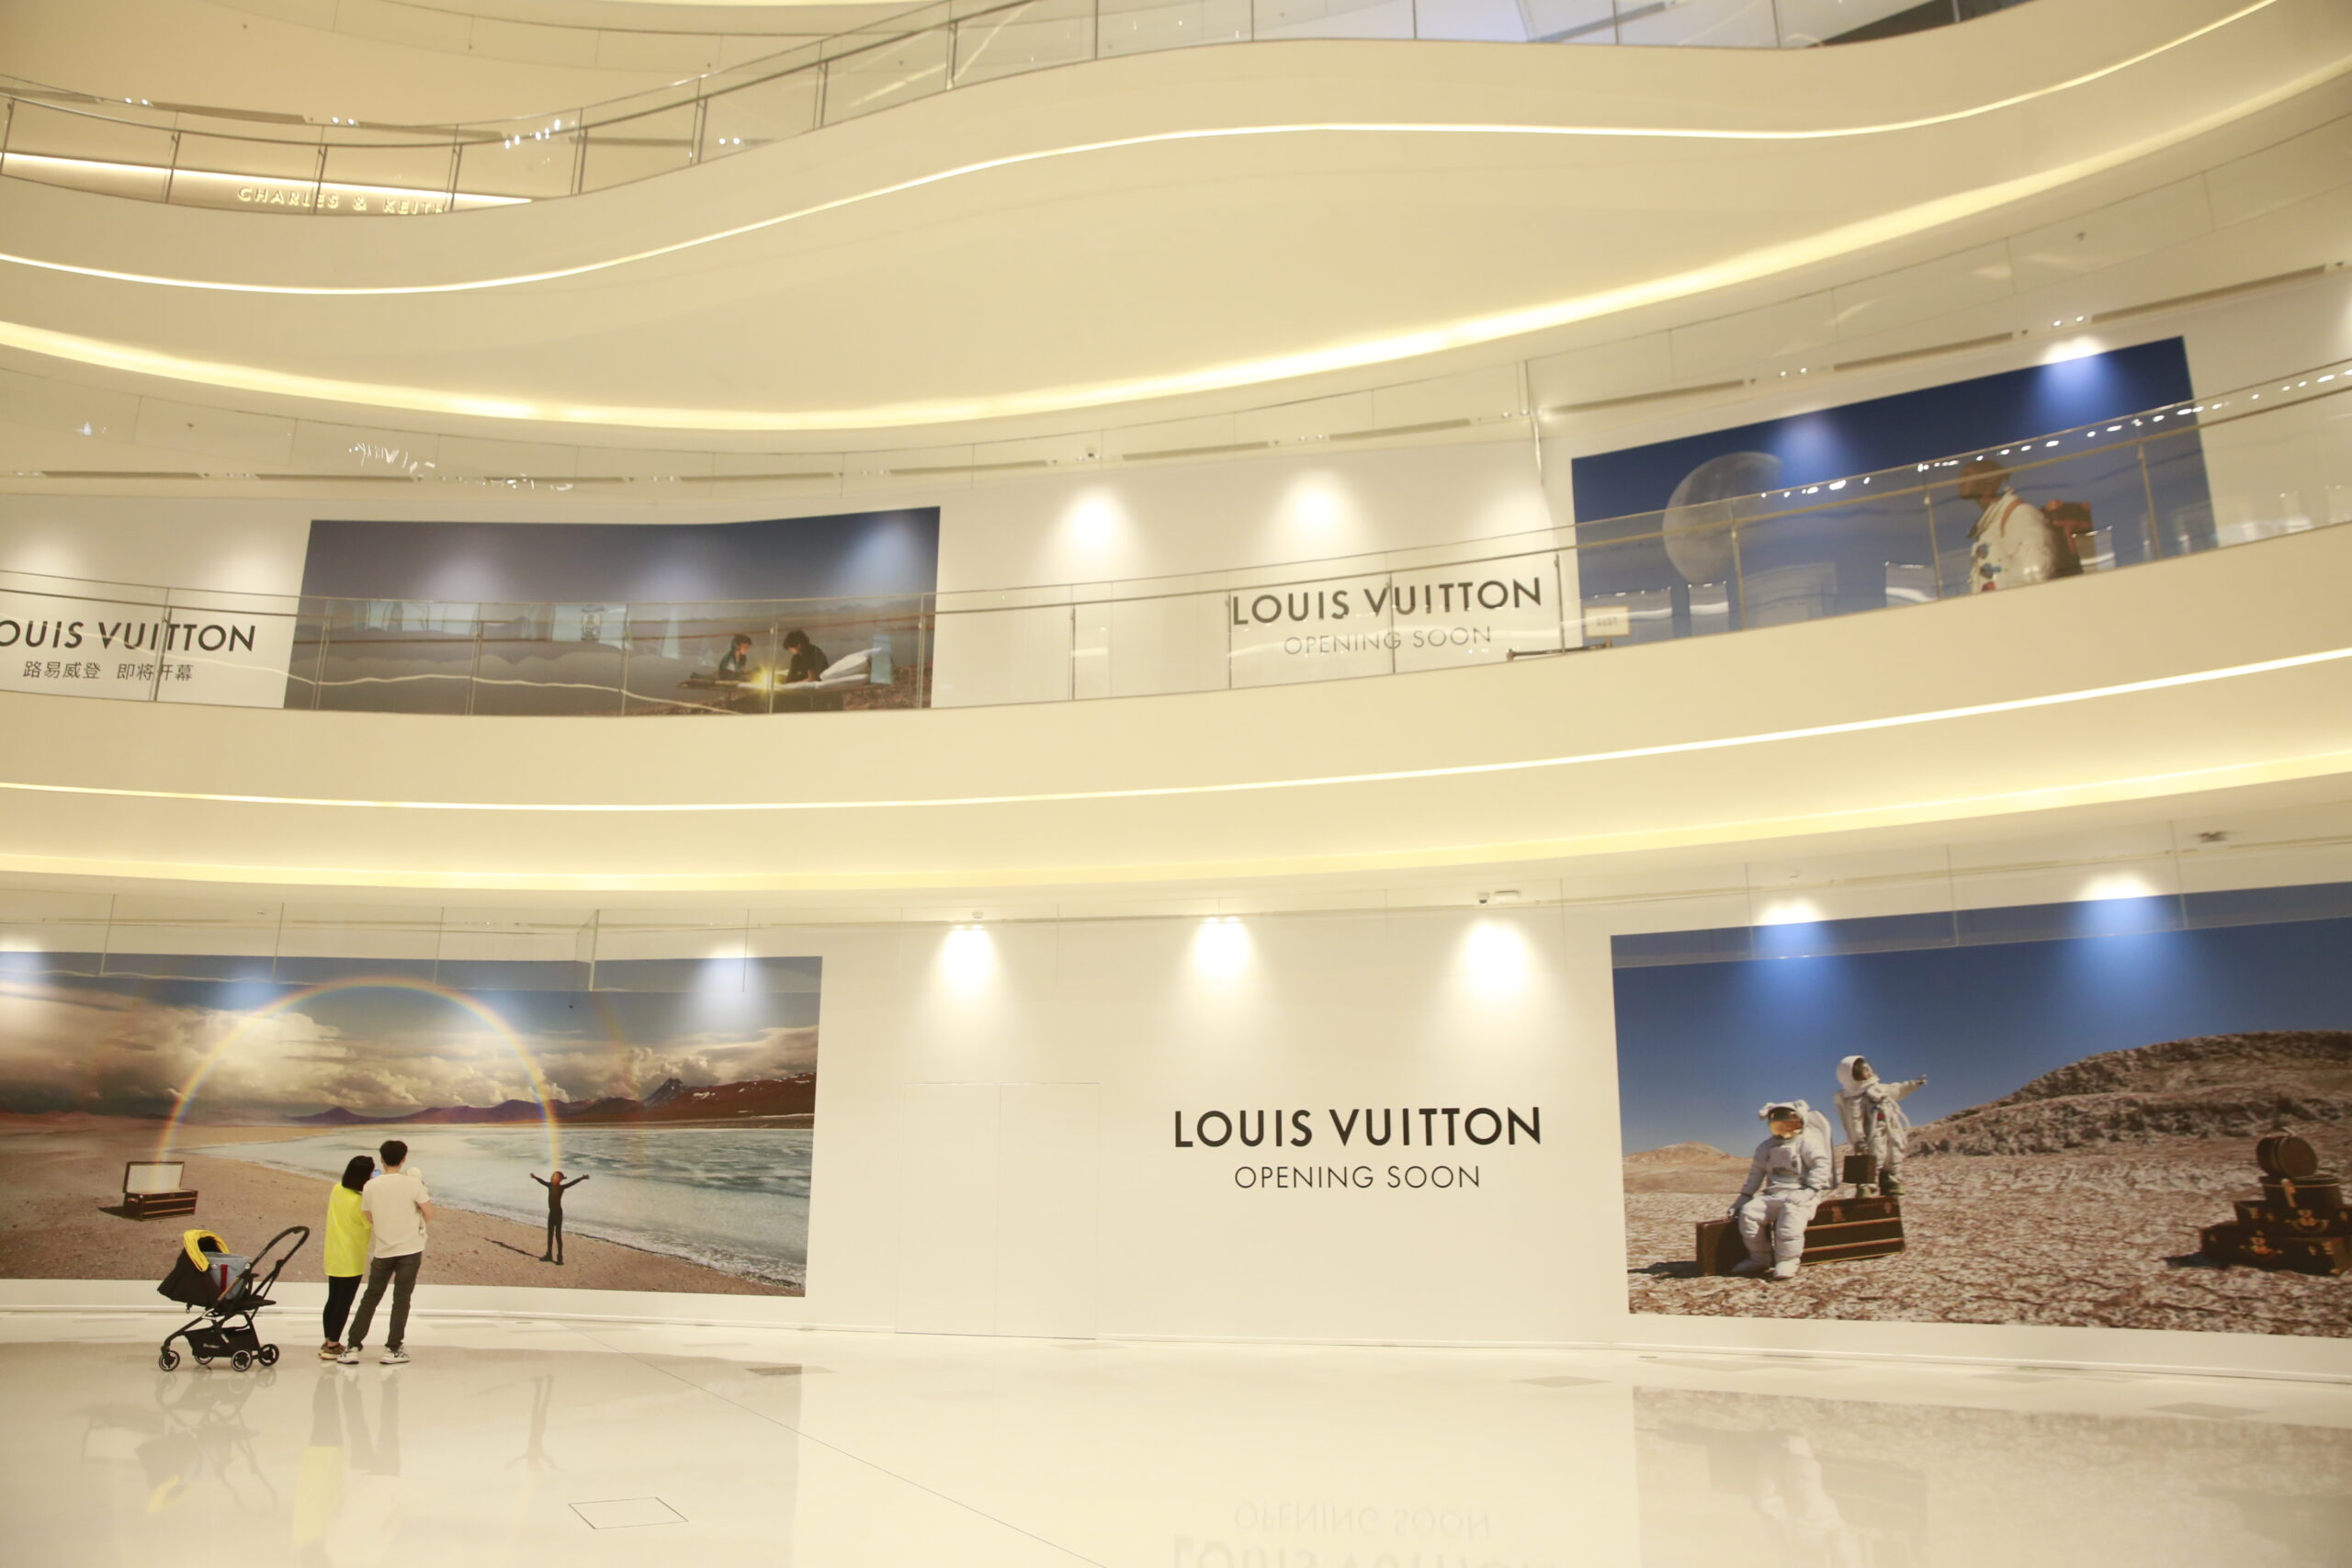 Louis Vuitton Makes its Debut in Hainan Market with Double-Storey Flagship Store in Haikou Mixc